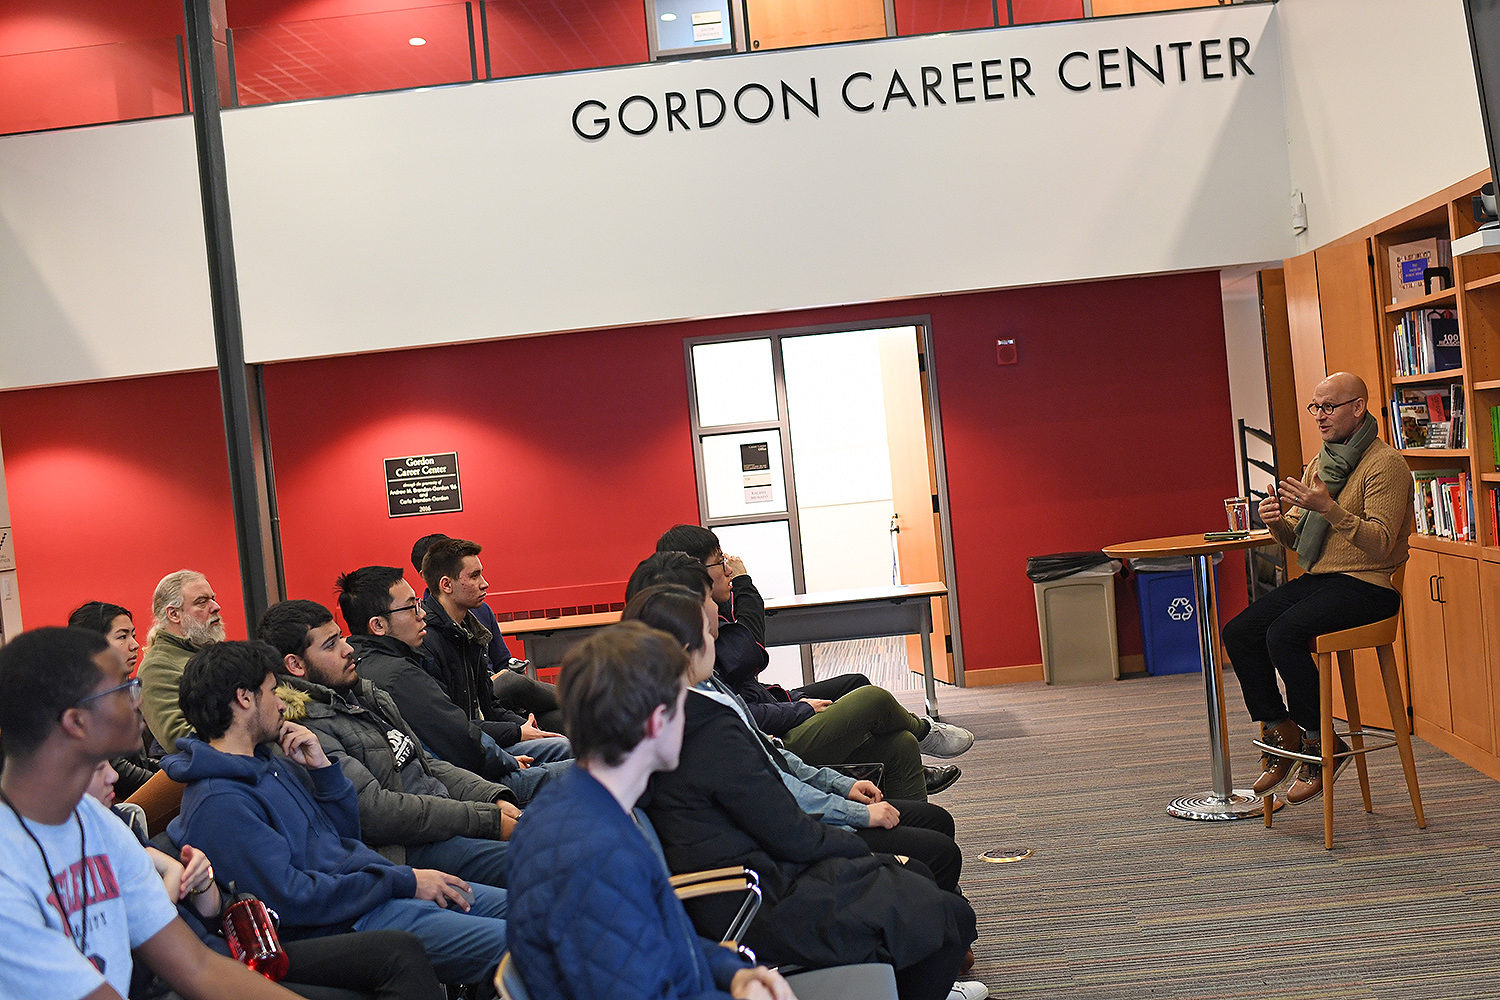 On Feb. 8, Tomer Rothschild '94 returned to campus to speak to students at the Gordon Career Center about his entrepreneurial path. Rothschild, who graduated from Wesleyan with a degree in philosophy, is the co-founder of Elite Scholars of China (ESC), an agency that aims to educate China's top high school students about their undergraduate options in the United States.